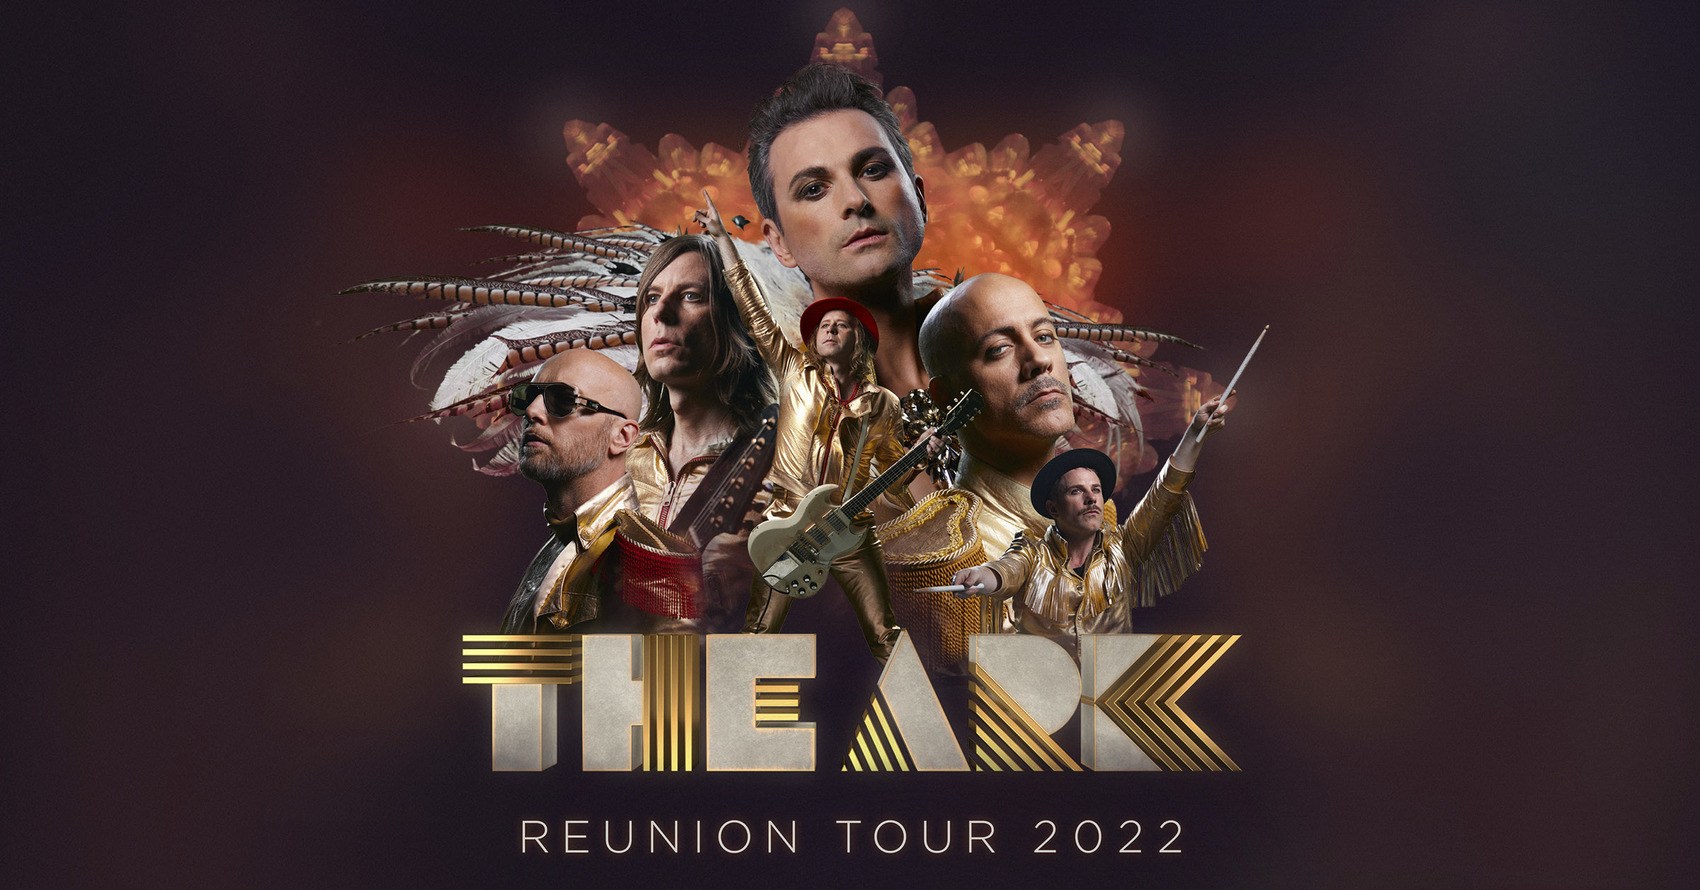 TheArk2022_FacebookPost_1200x628px_Annons